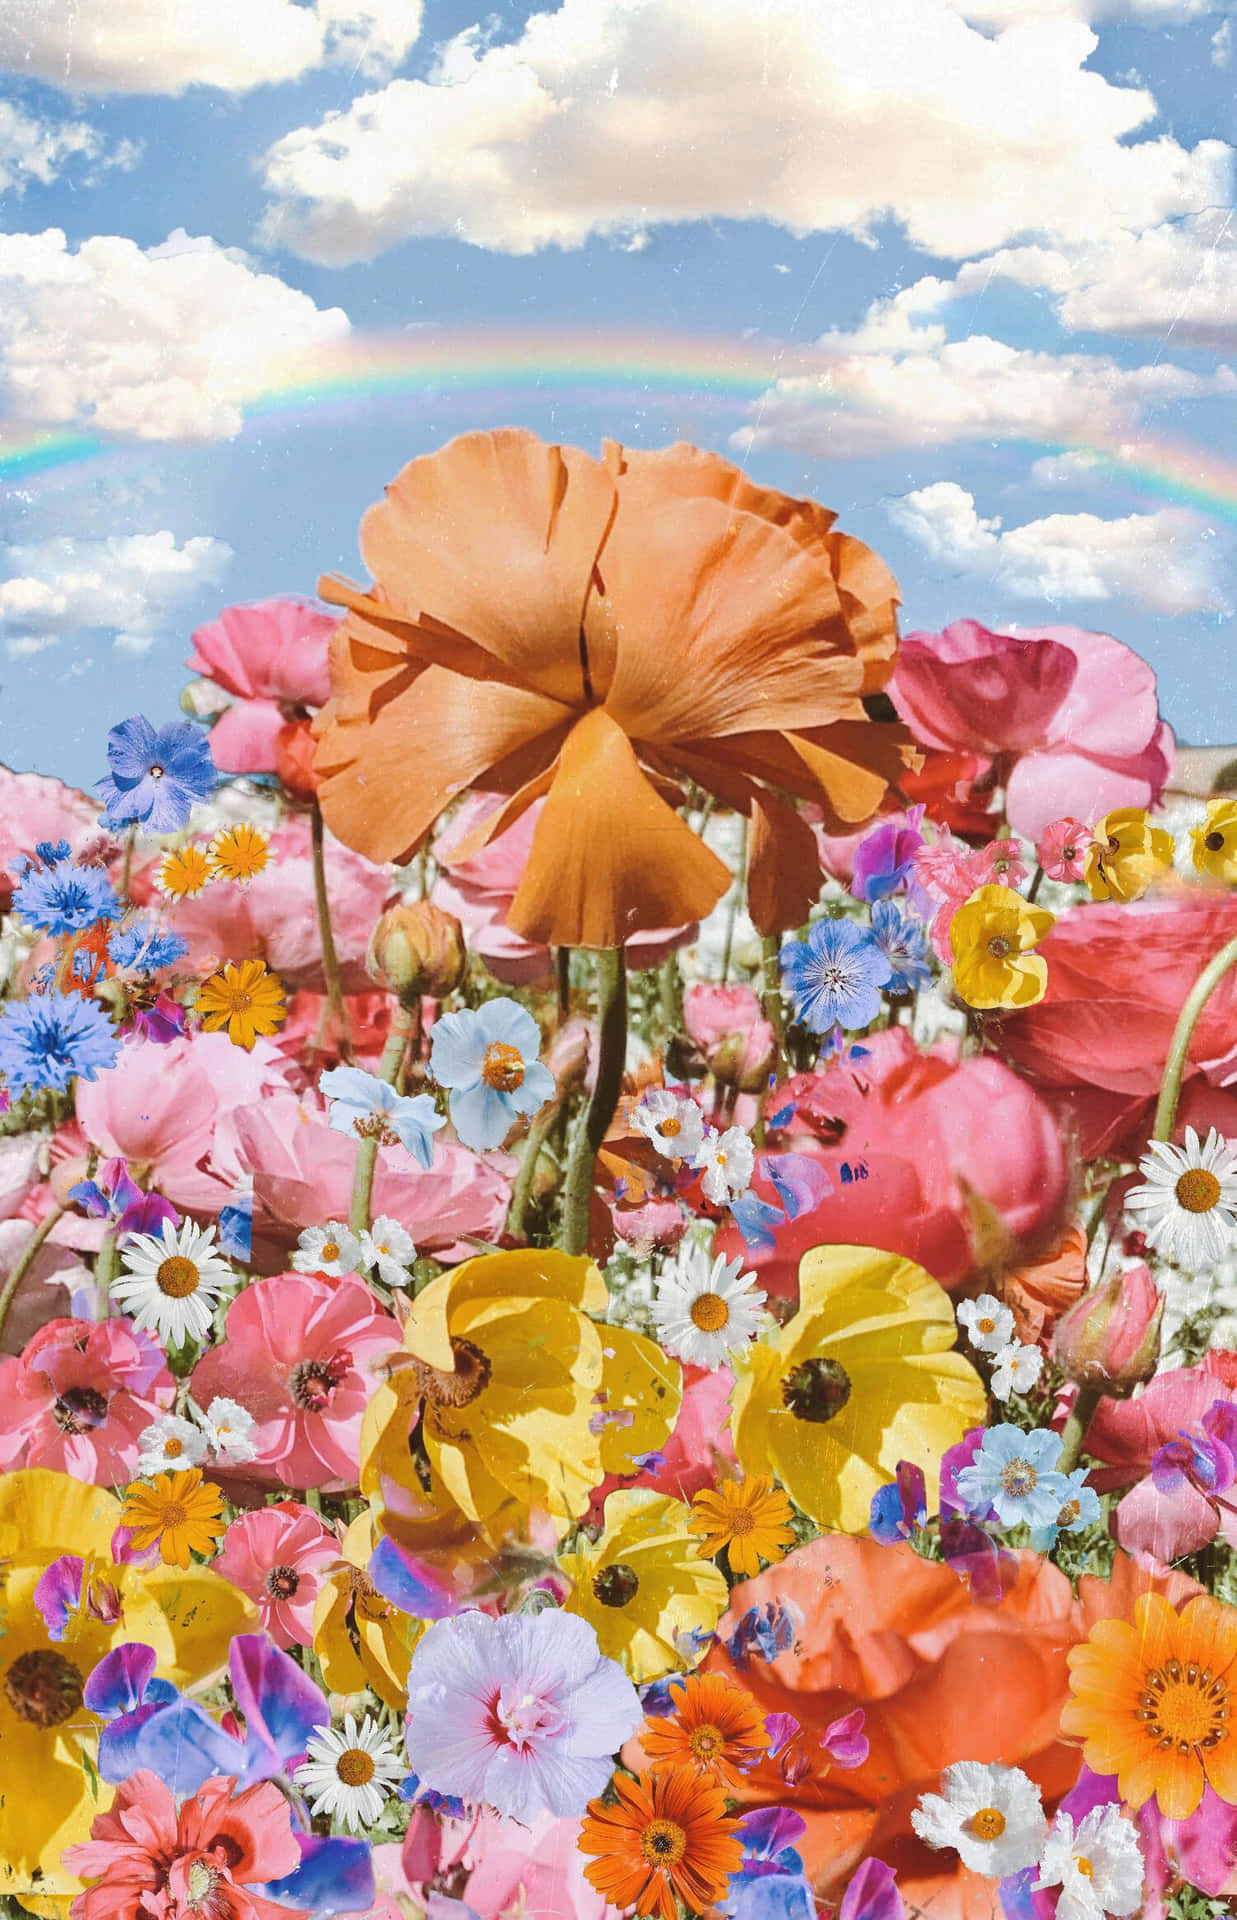 Trippy Aesthetic Cloud With Flowers Wallpaper